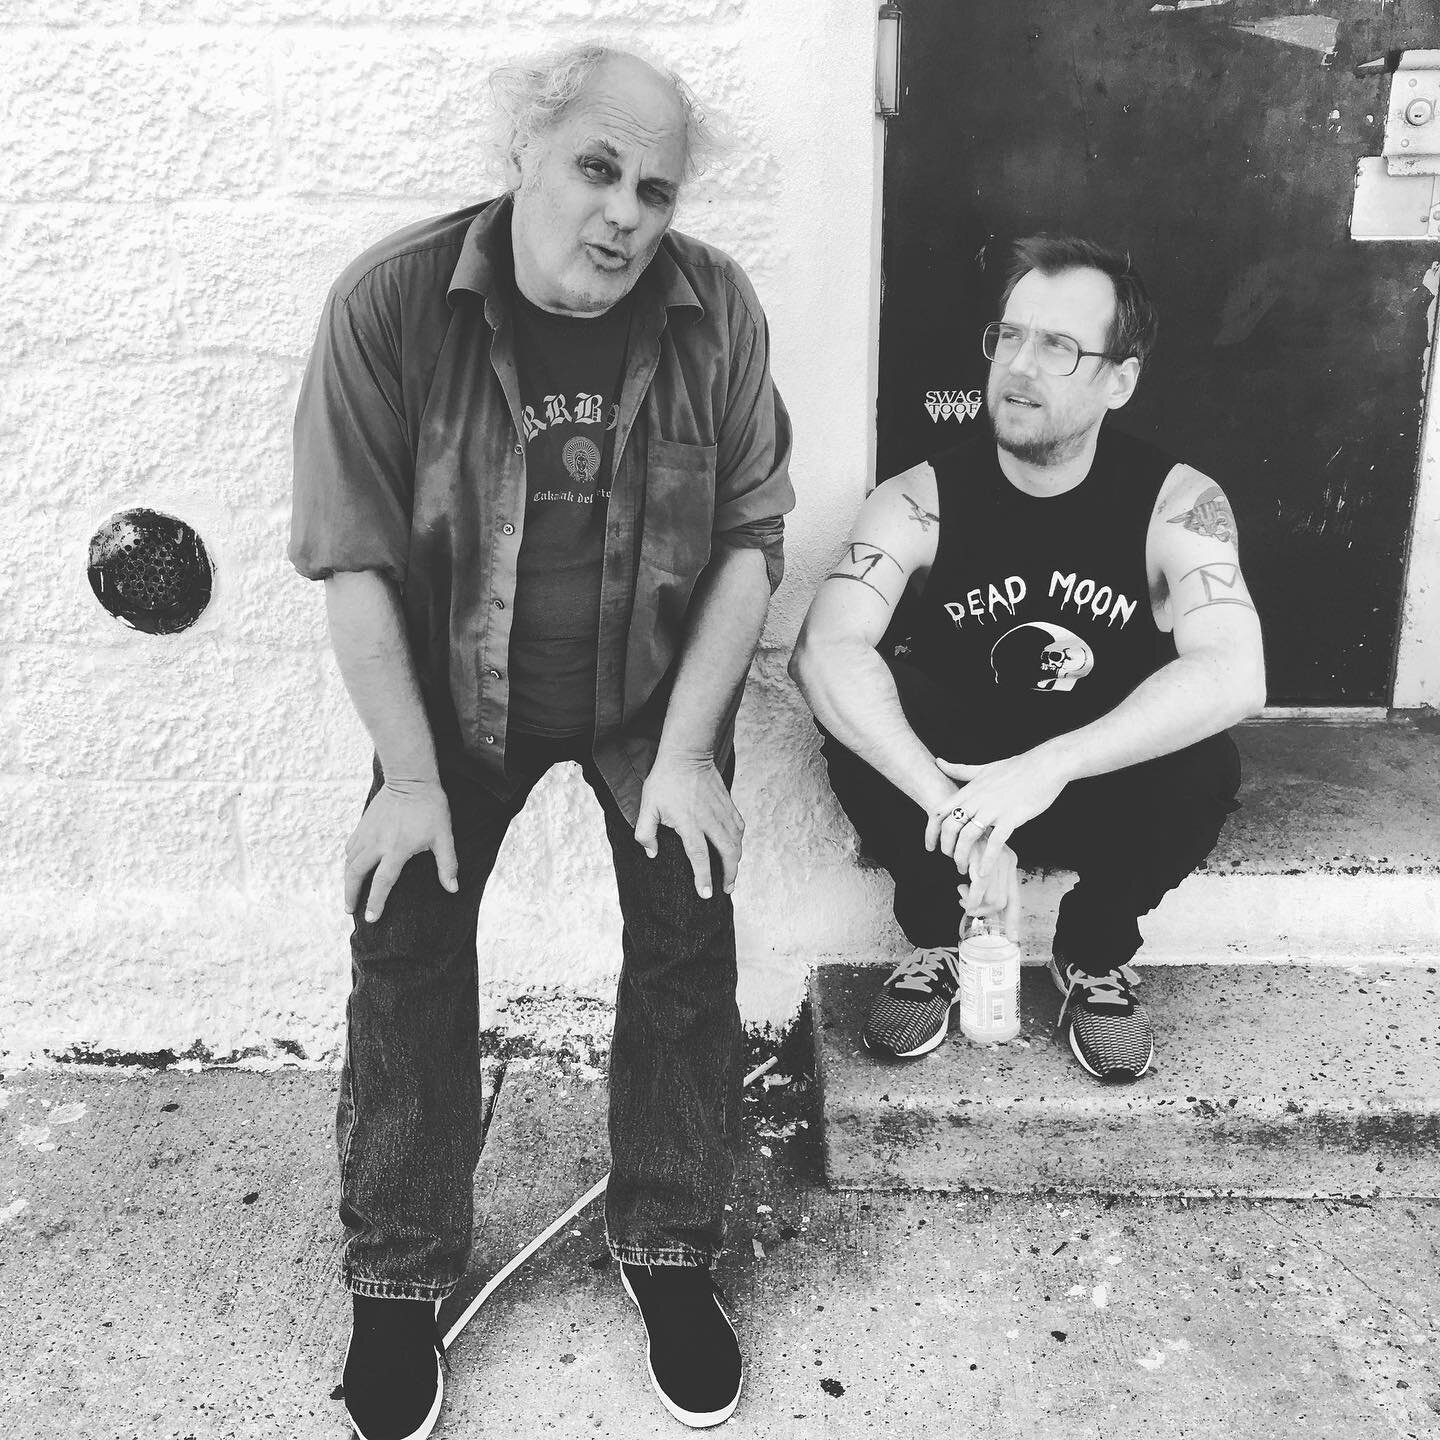 Dr. Eugene Chadbourne and Jim McHugh will be performing at Eyedrum in Atlanta, GA On Wednesday, May 31. 

Dr. Chadbourne, an improviser, songwriter, protest singer, collaborator, composer and producer of DIY releases since the early 1970s, when he le